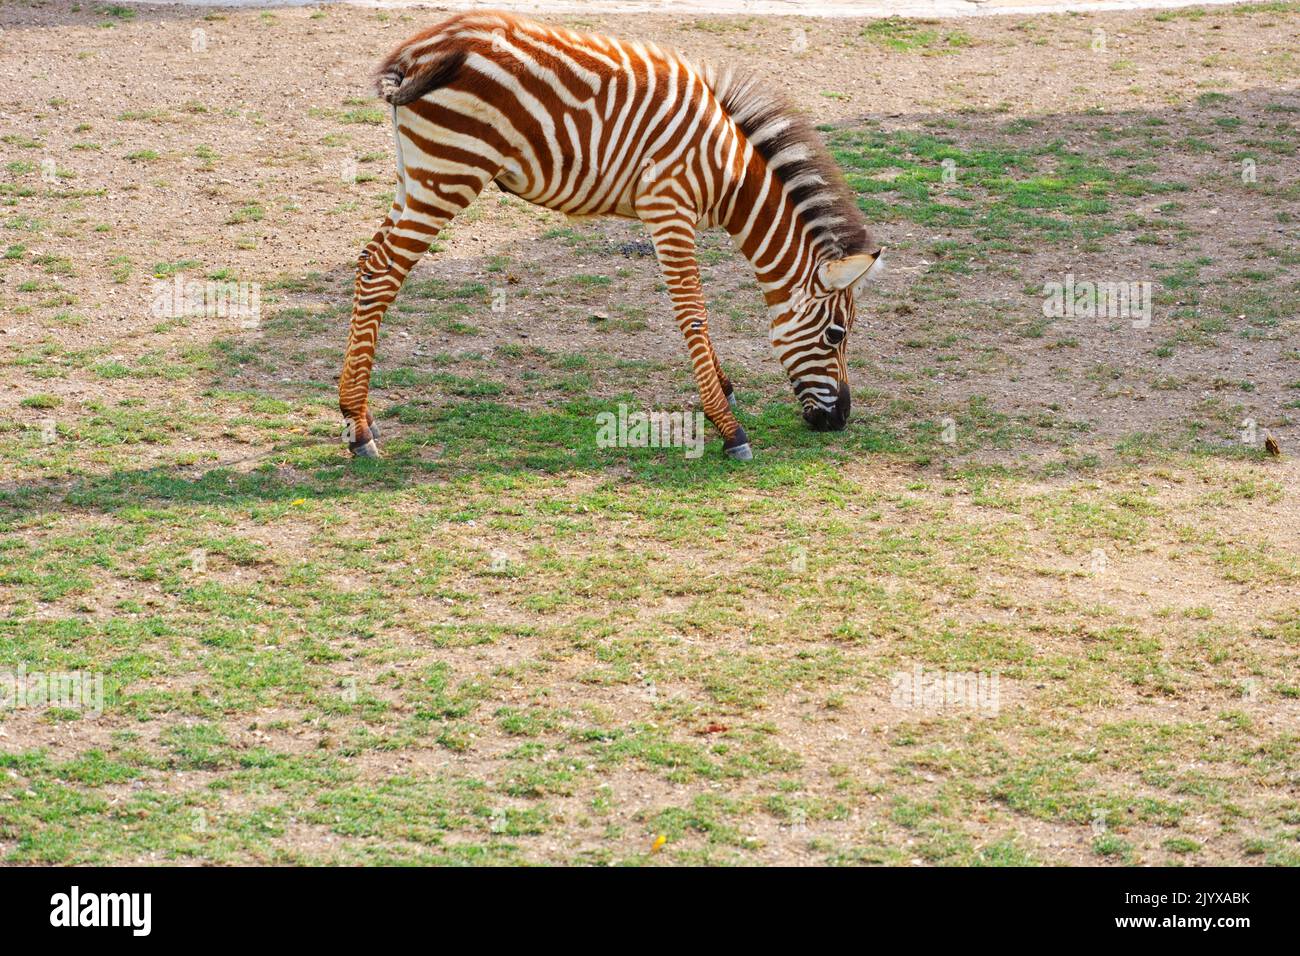 Baby Zebra with brown and white colors eating grass outdoor Stock Photo